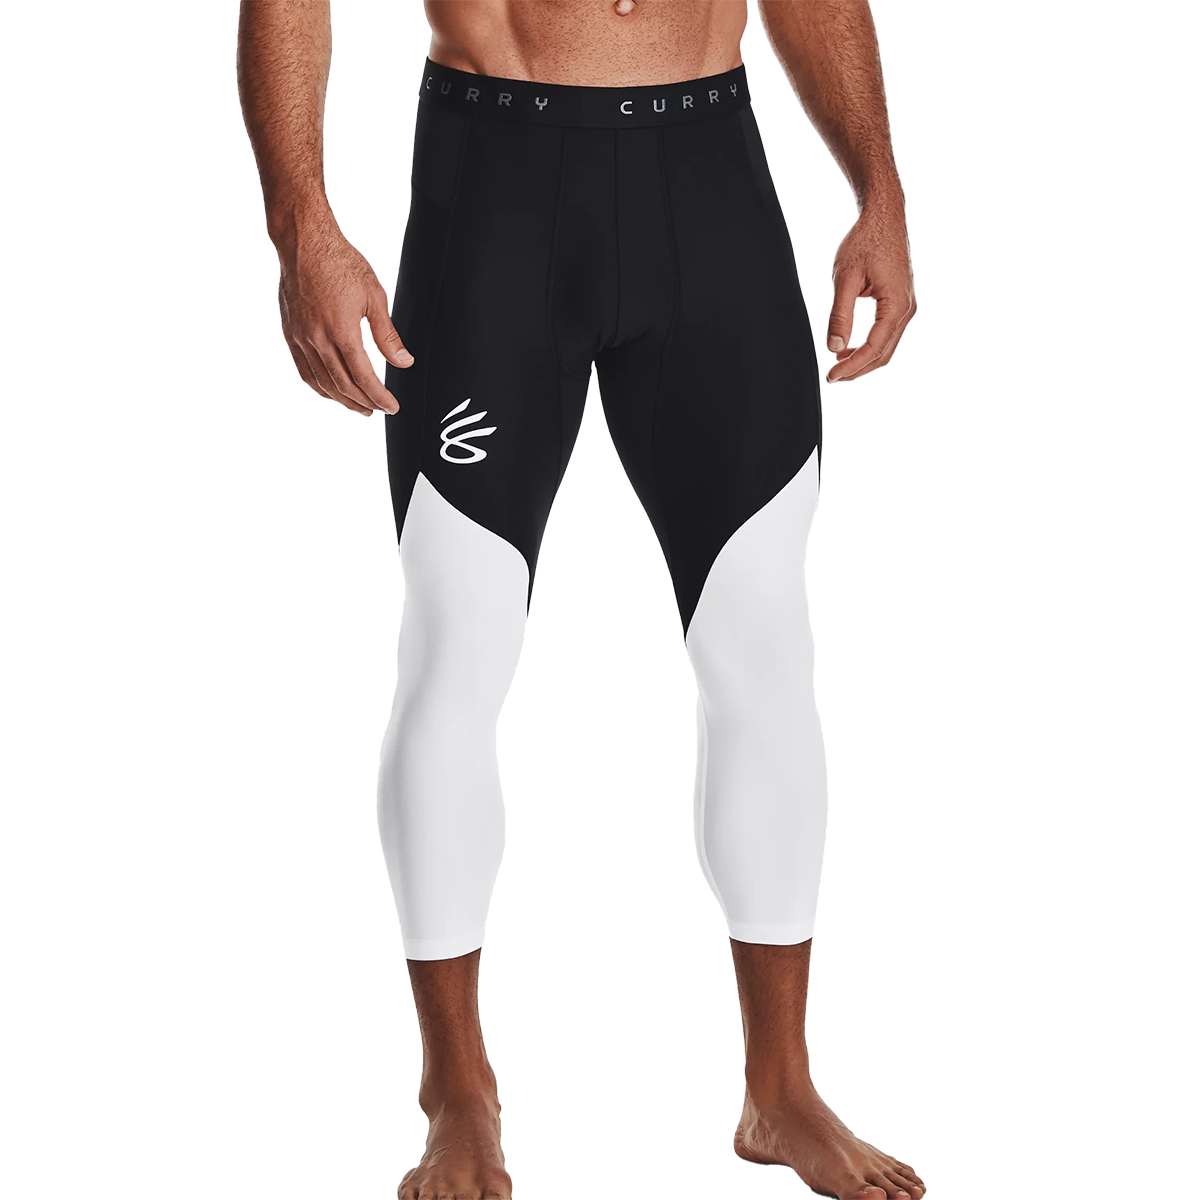 Under Armour Curry UNDRTD 3/4 Compression Tights Black/White